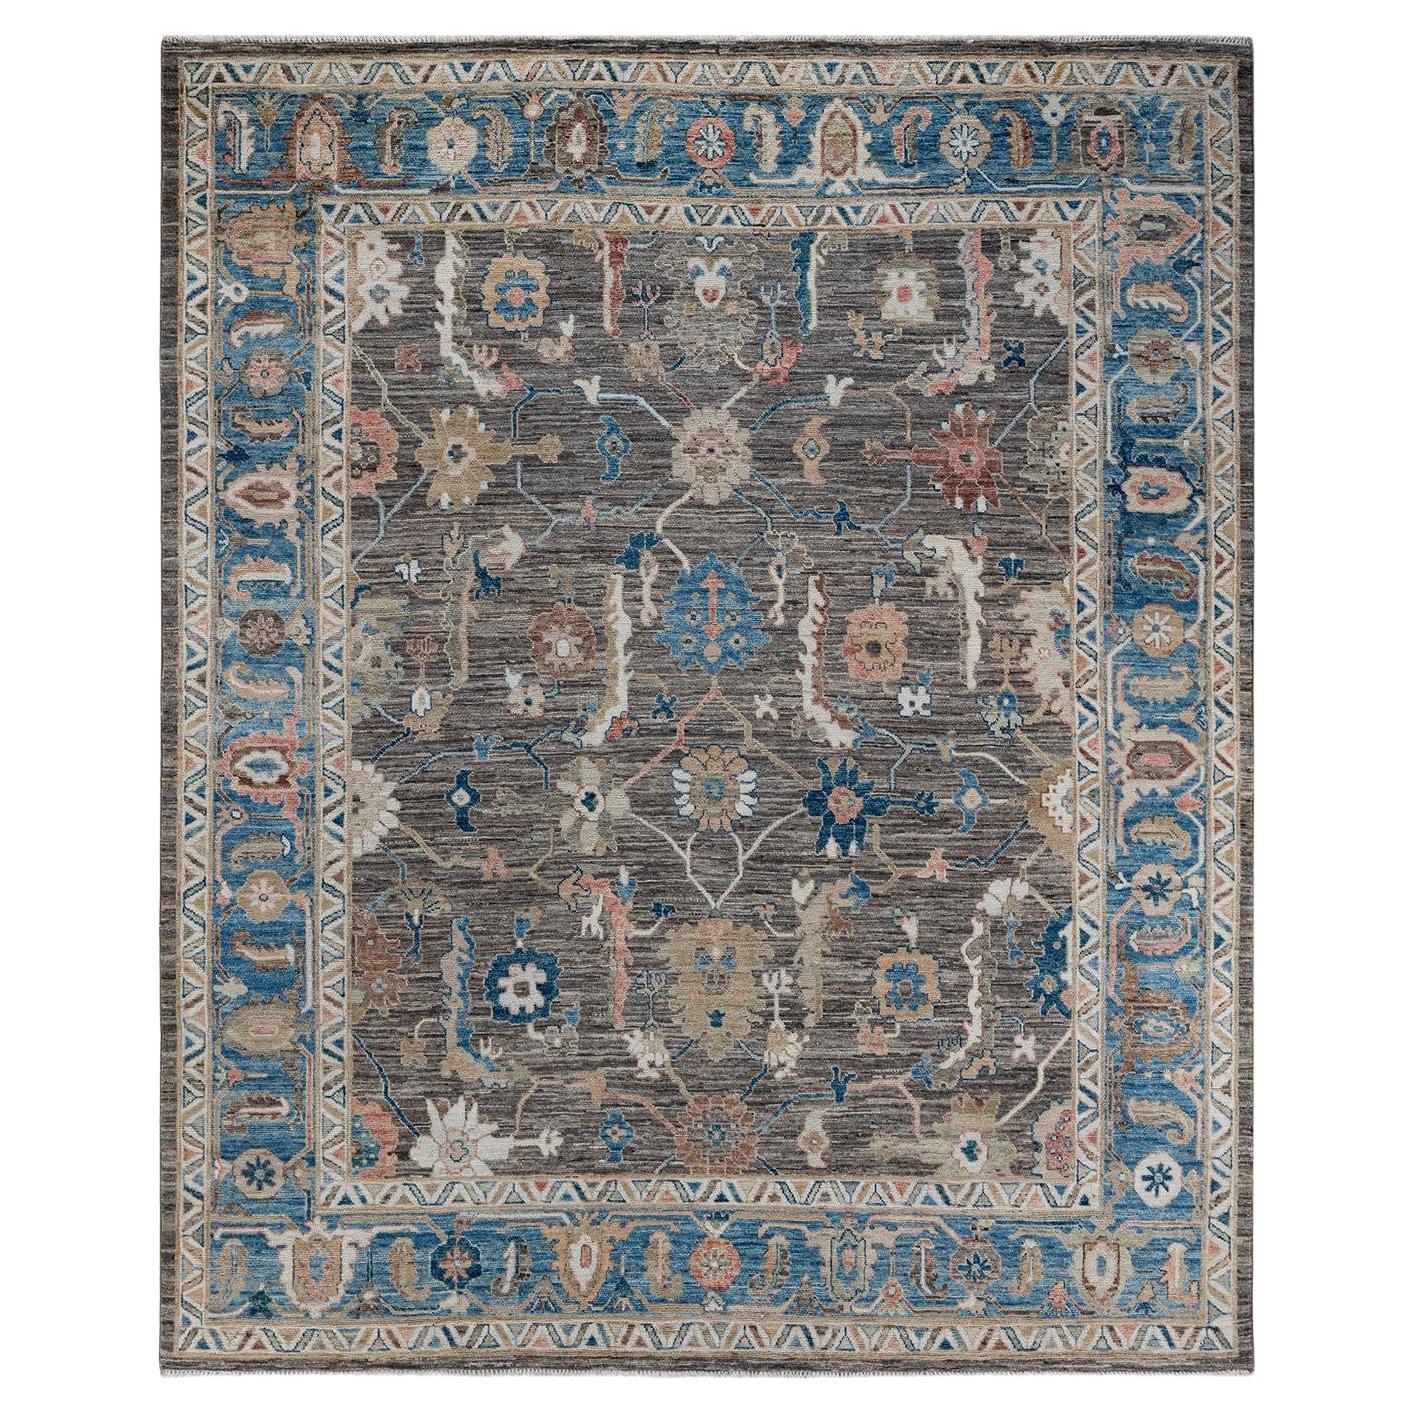 Oushak, One-of-a-kind Hand Knotted Runner Rug, Beige